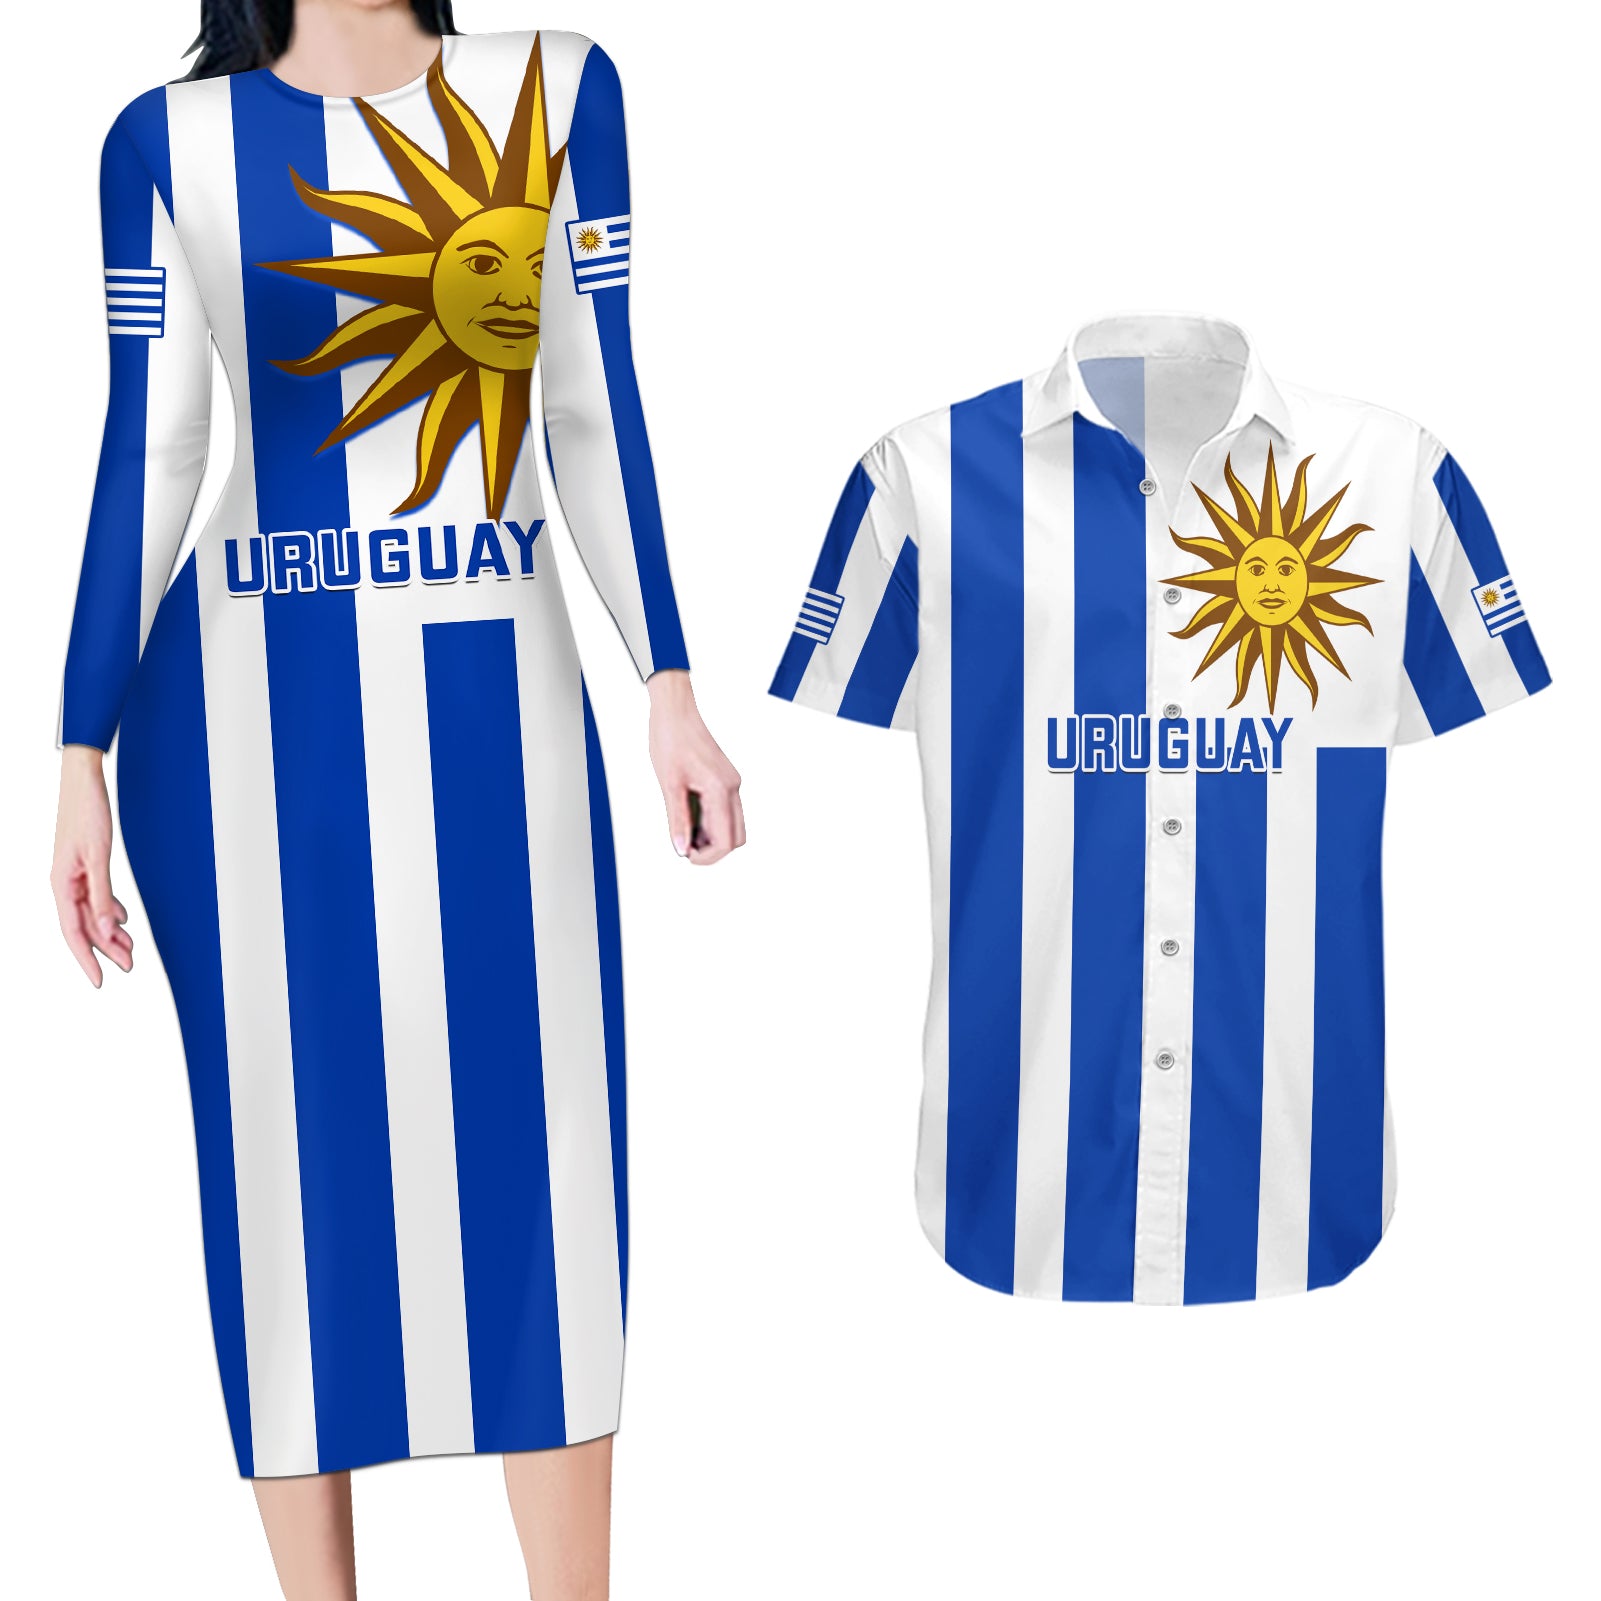 uruguay-rugby-couples-matching-long-sleeve-bodycon-dress-and-hawaiian-shirt-go-los-teros-flag-style